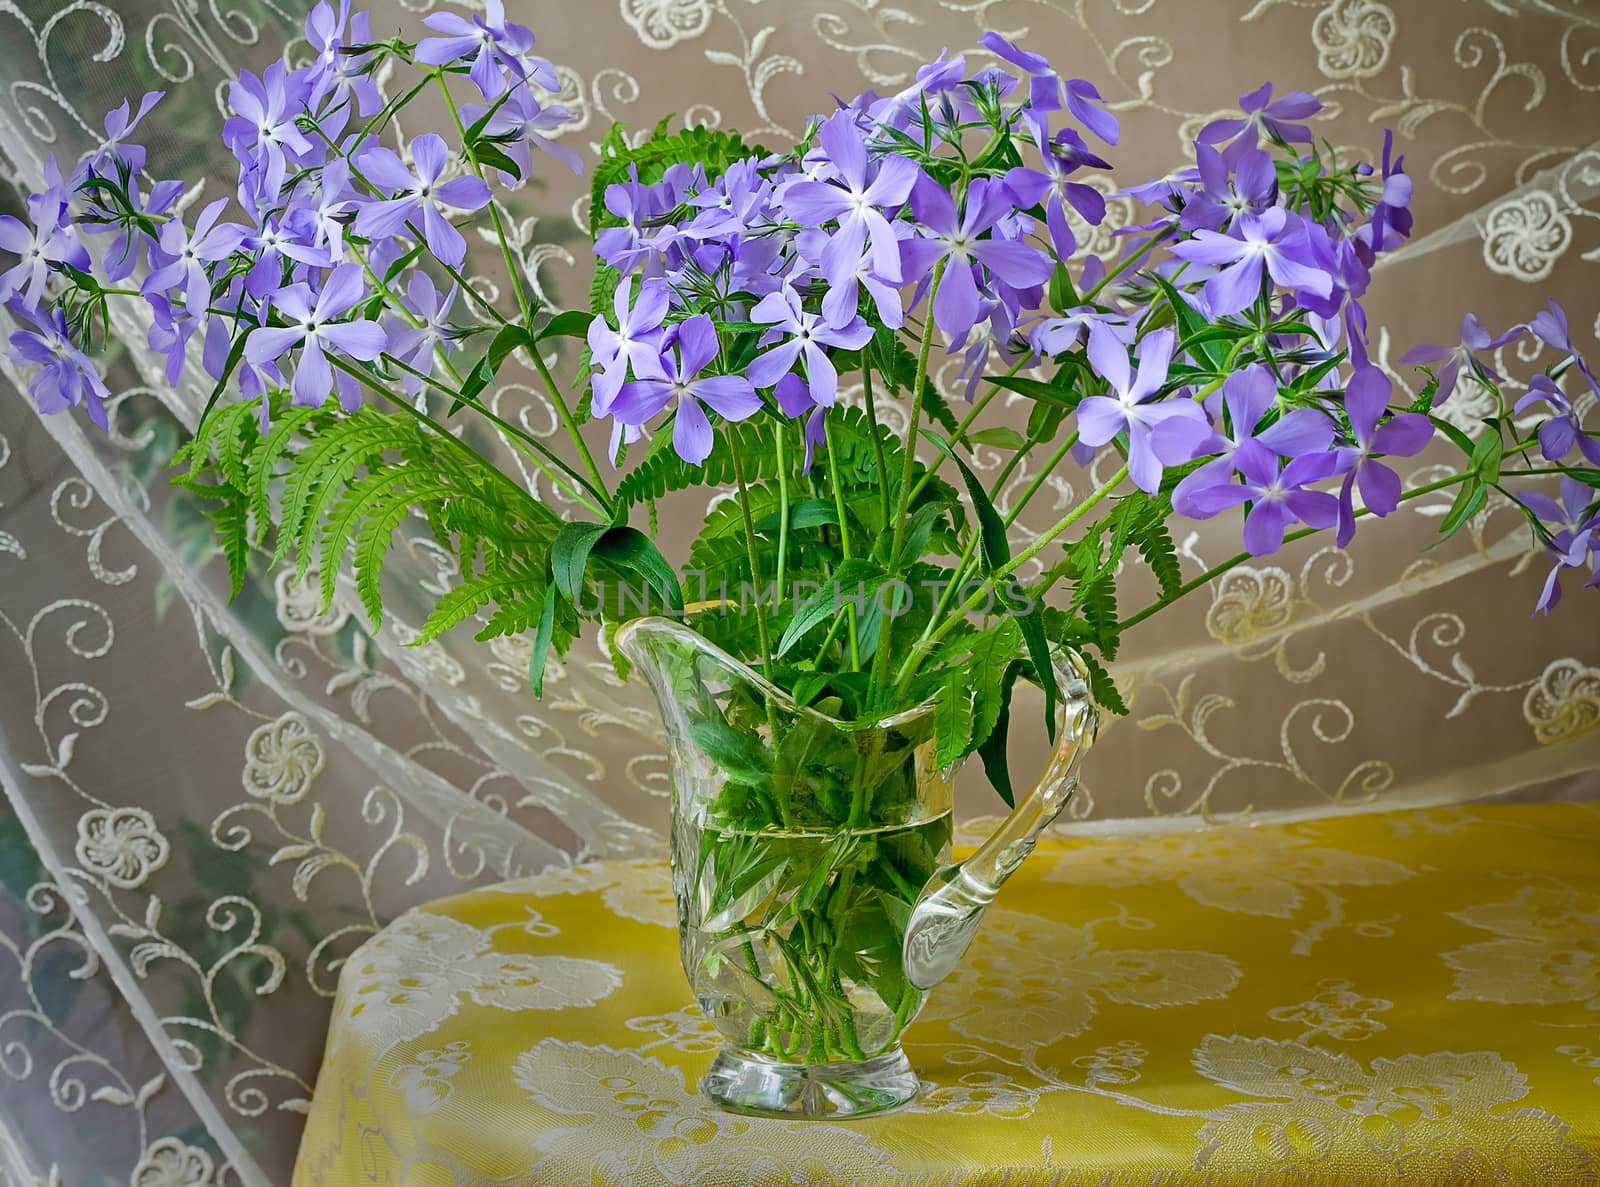 Blossoming violets in a crystal vase. by georgina198